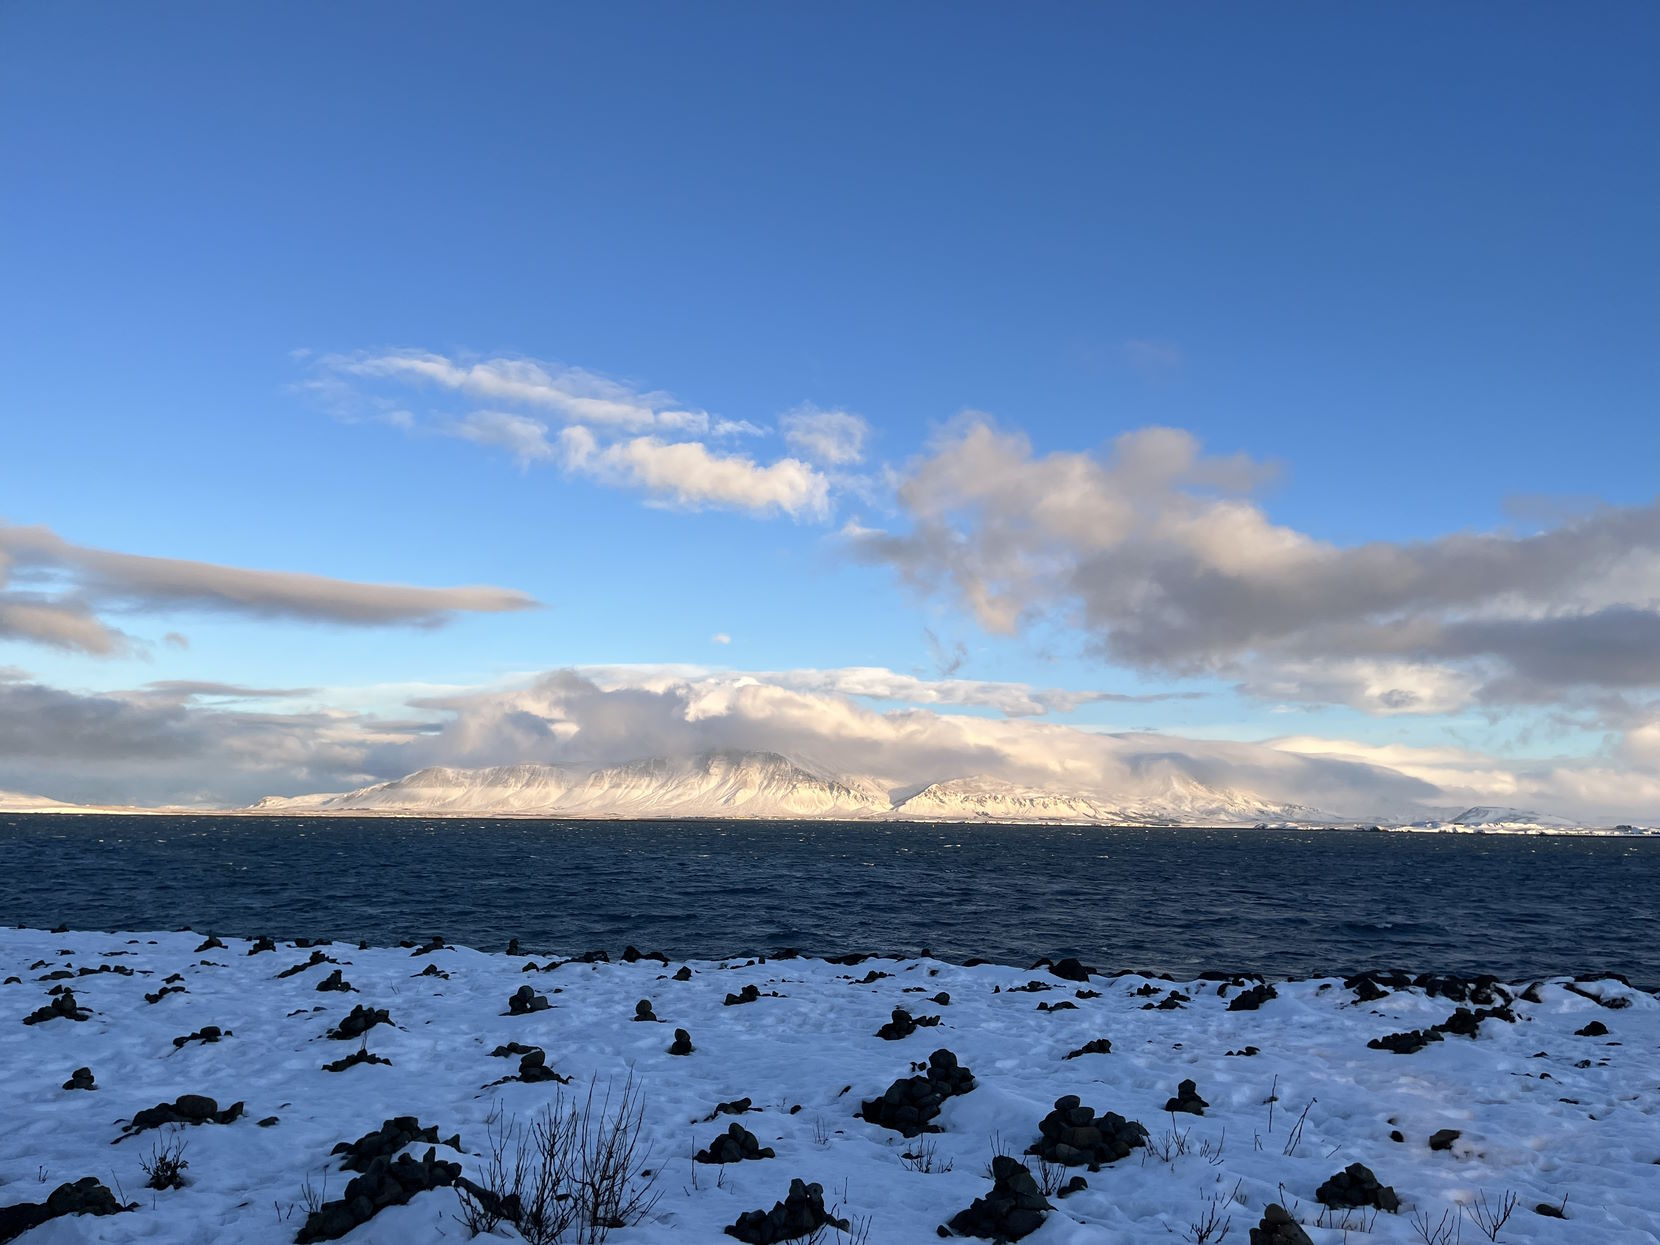 View of Kollafjörður Bay looking north from Reykjavík, with mountains at the far side of the bay.